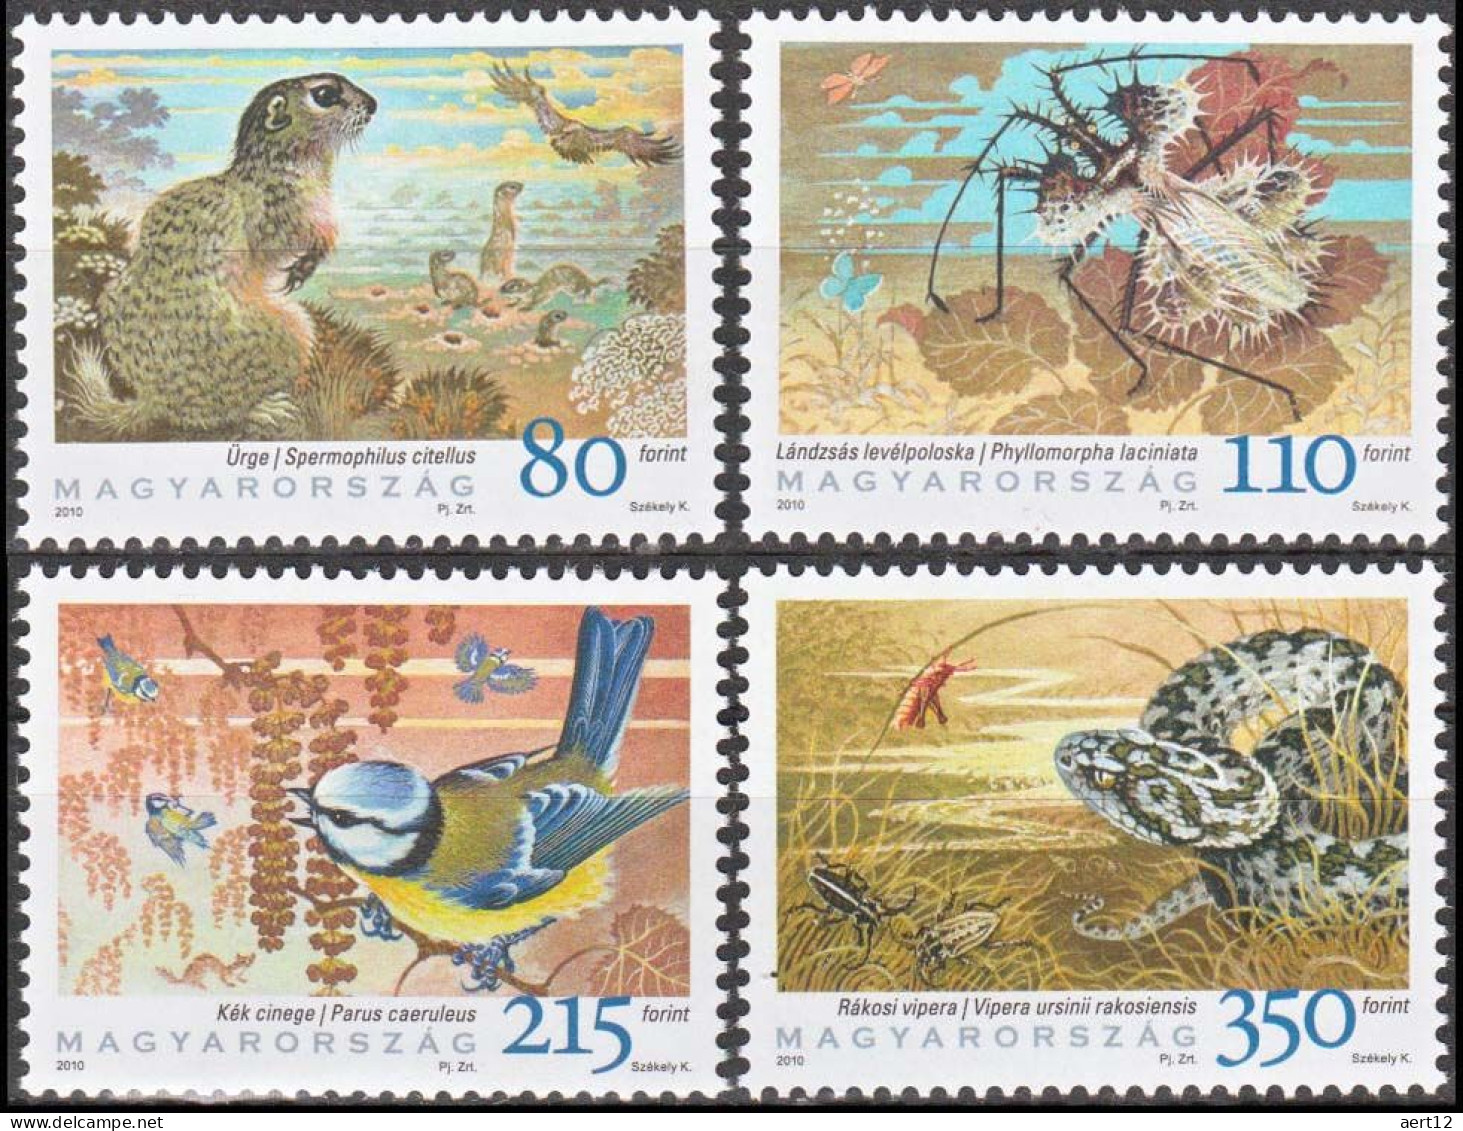 2010, Hungary, Biodiversity, Birds, Insects, Rodents, Snakes, Squirrels, 4 Stamps, MNH(**), HU 5473-76 - Serpenti